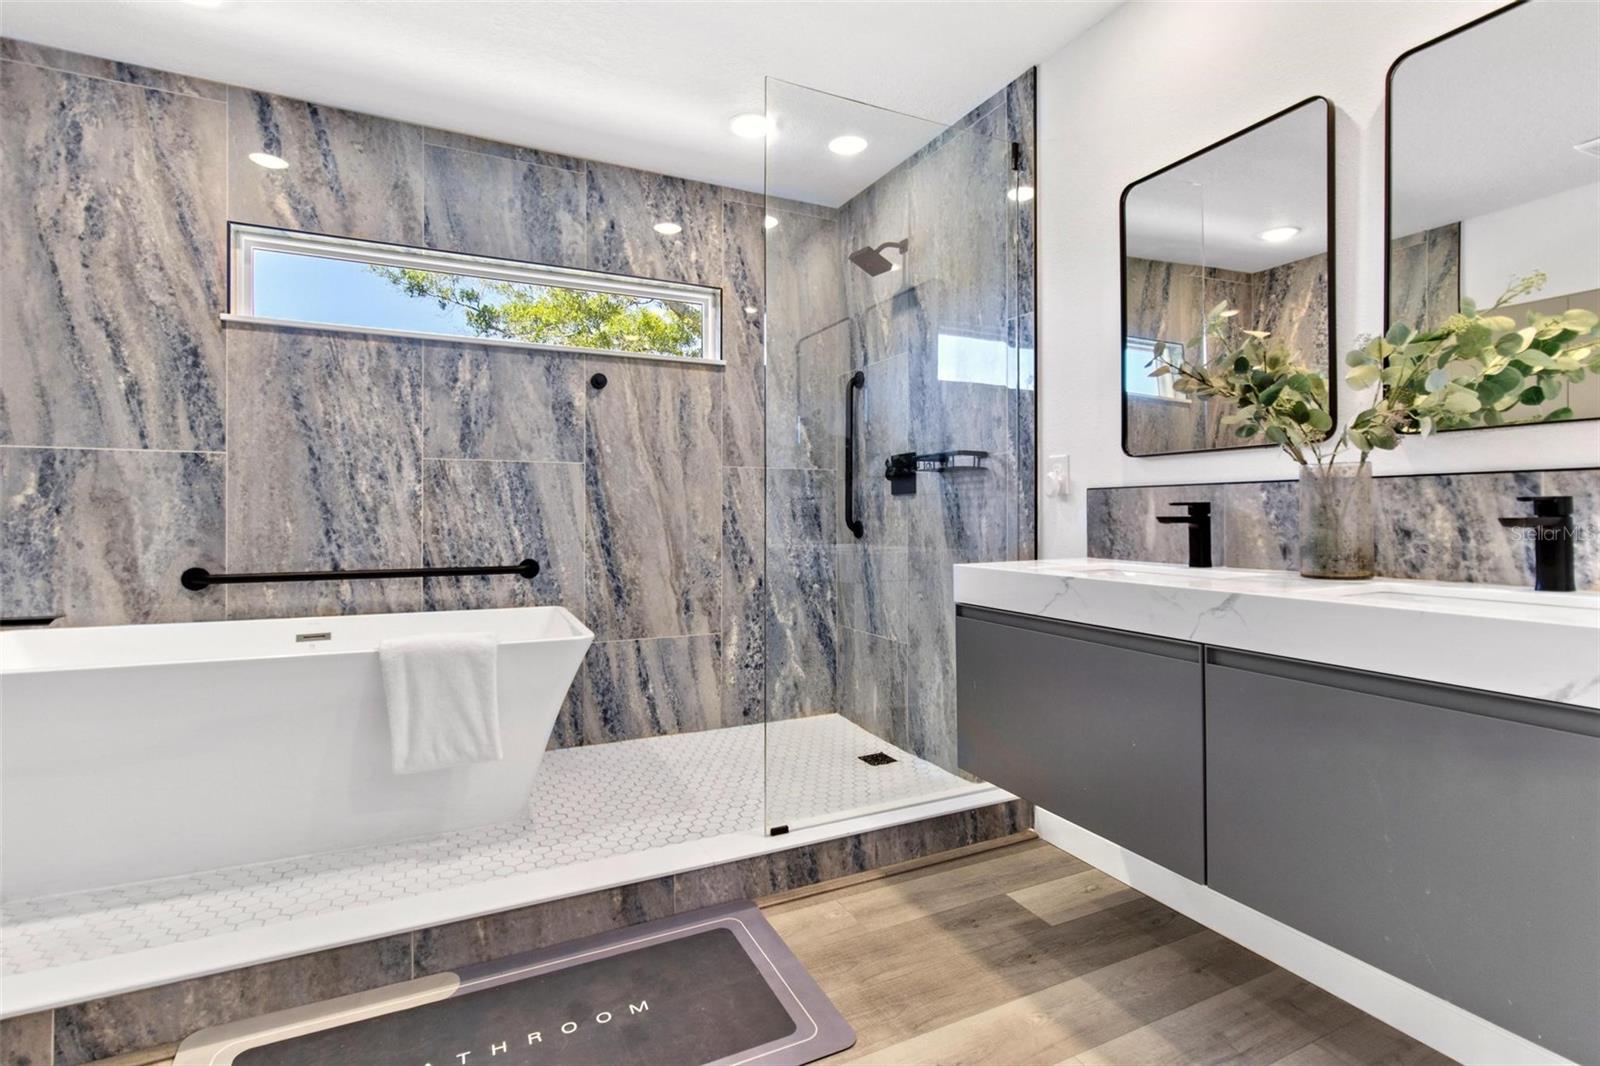 This Spa-like primary ensuite, with floating dual vanity, standalone bathtub, luxury walking shower are a dream.